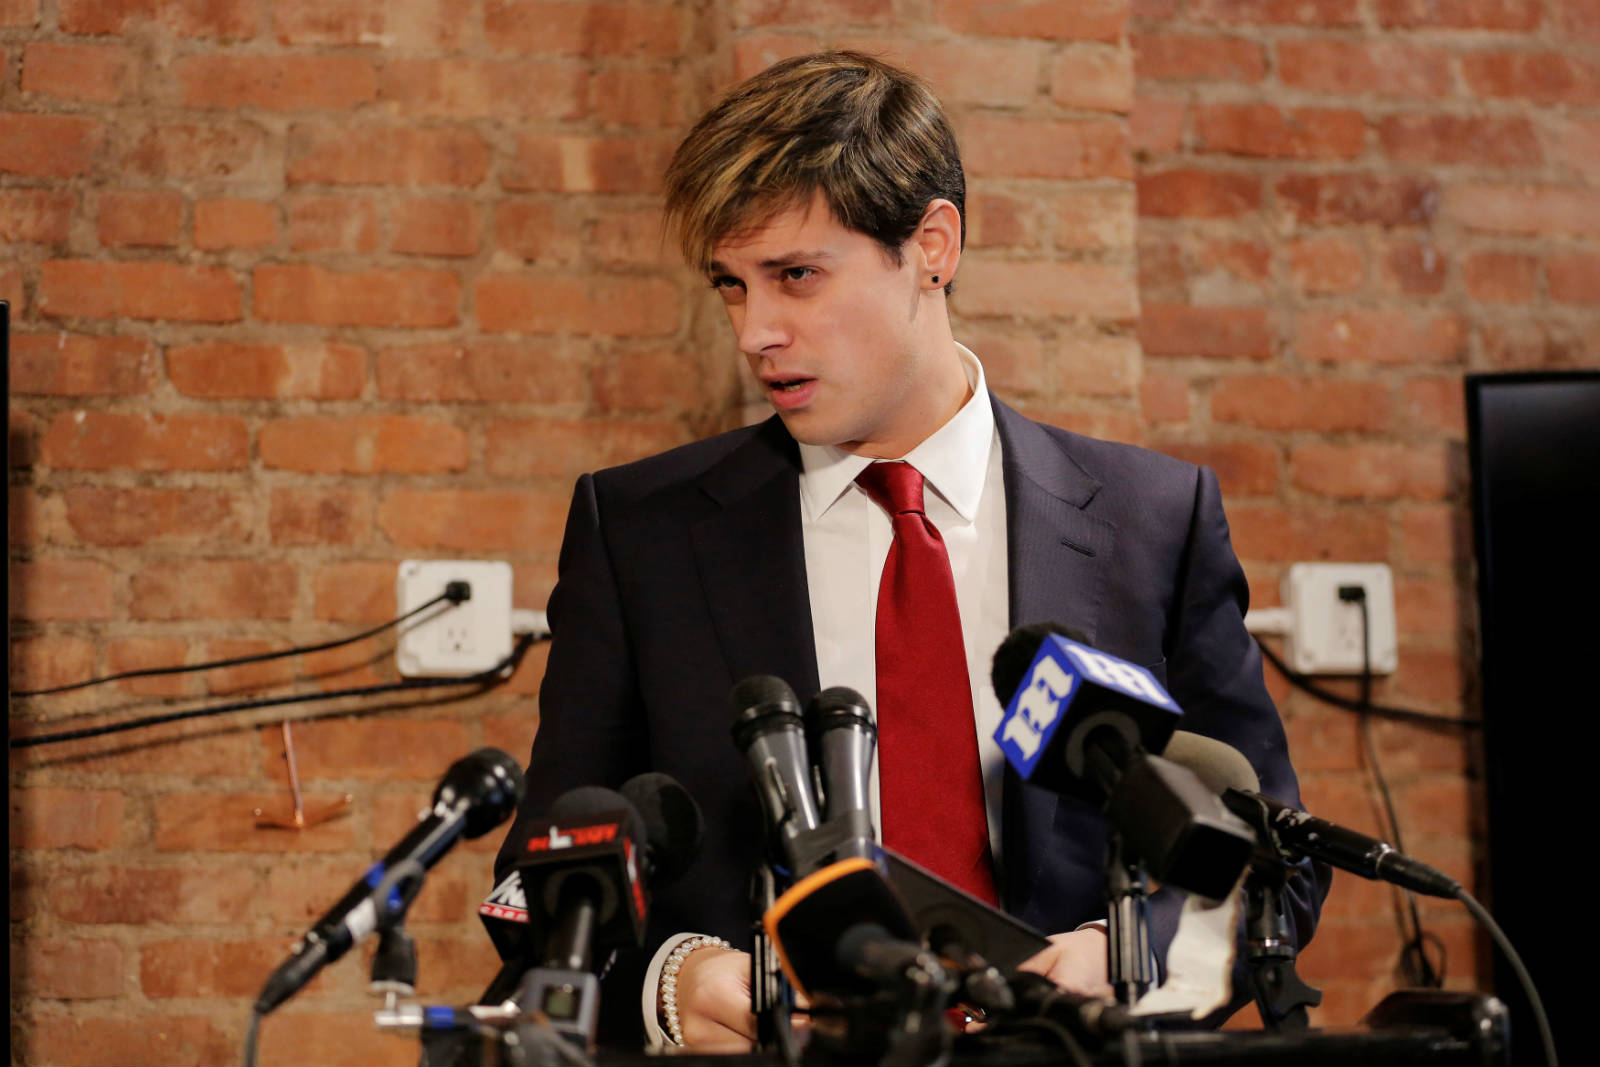 Milo Yiannopoulos 圖片來源：路透社